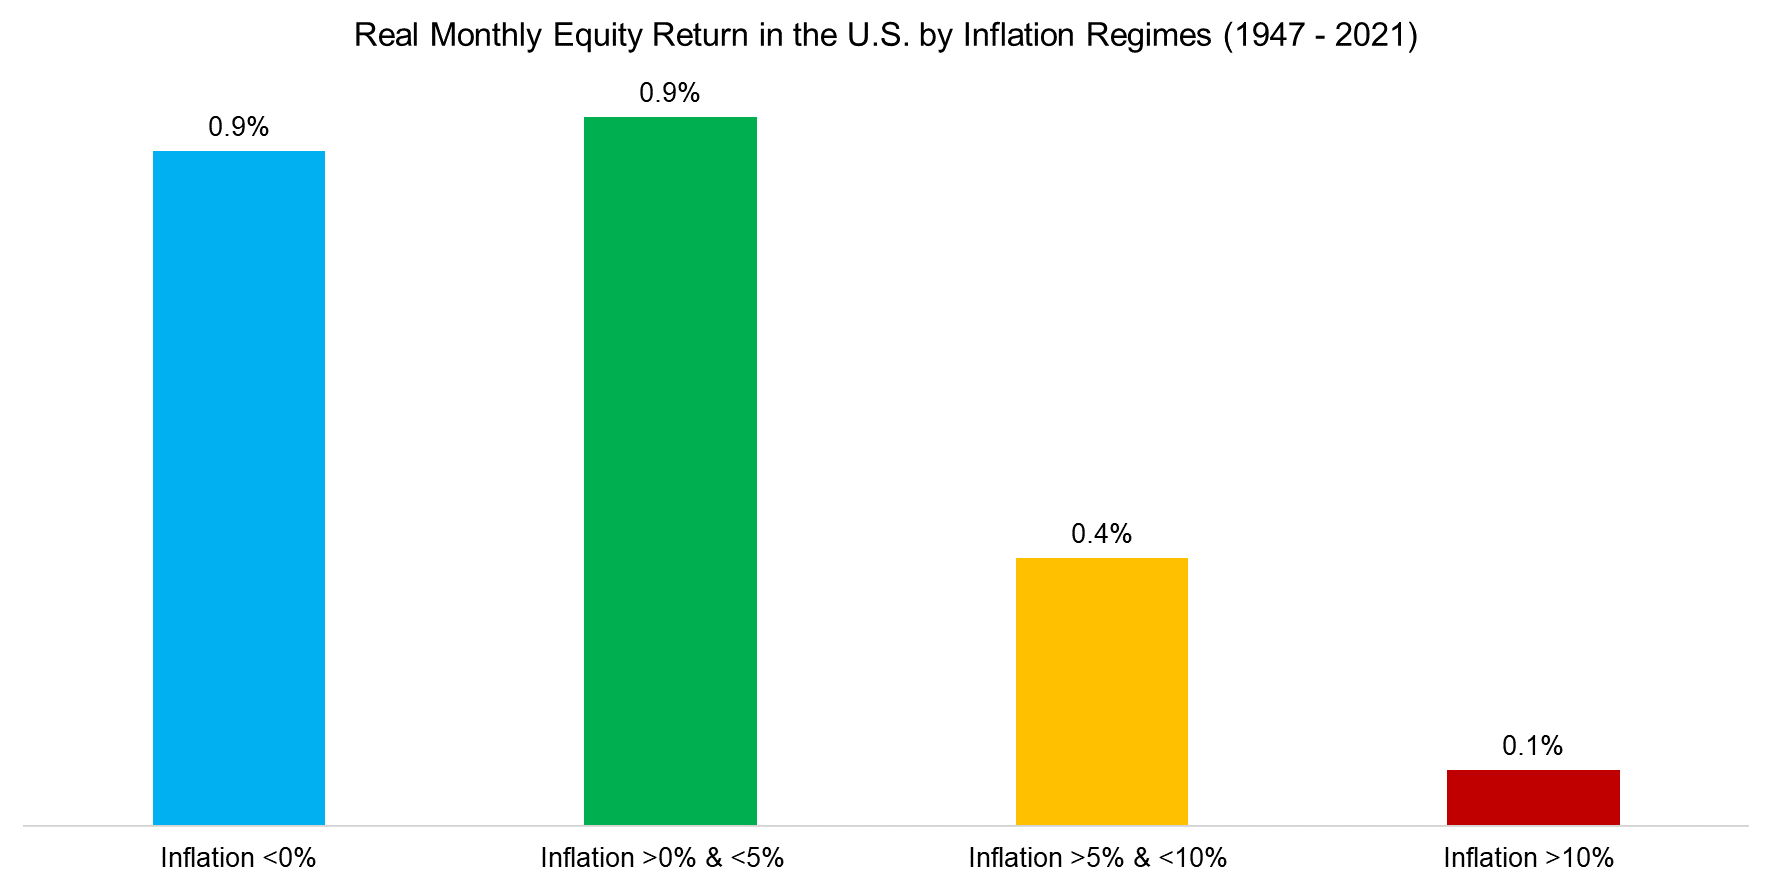 Real Monthly Equity Return in the U.S. by Inflation Regimes (1947 - 2021)